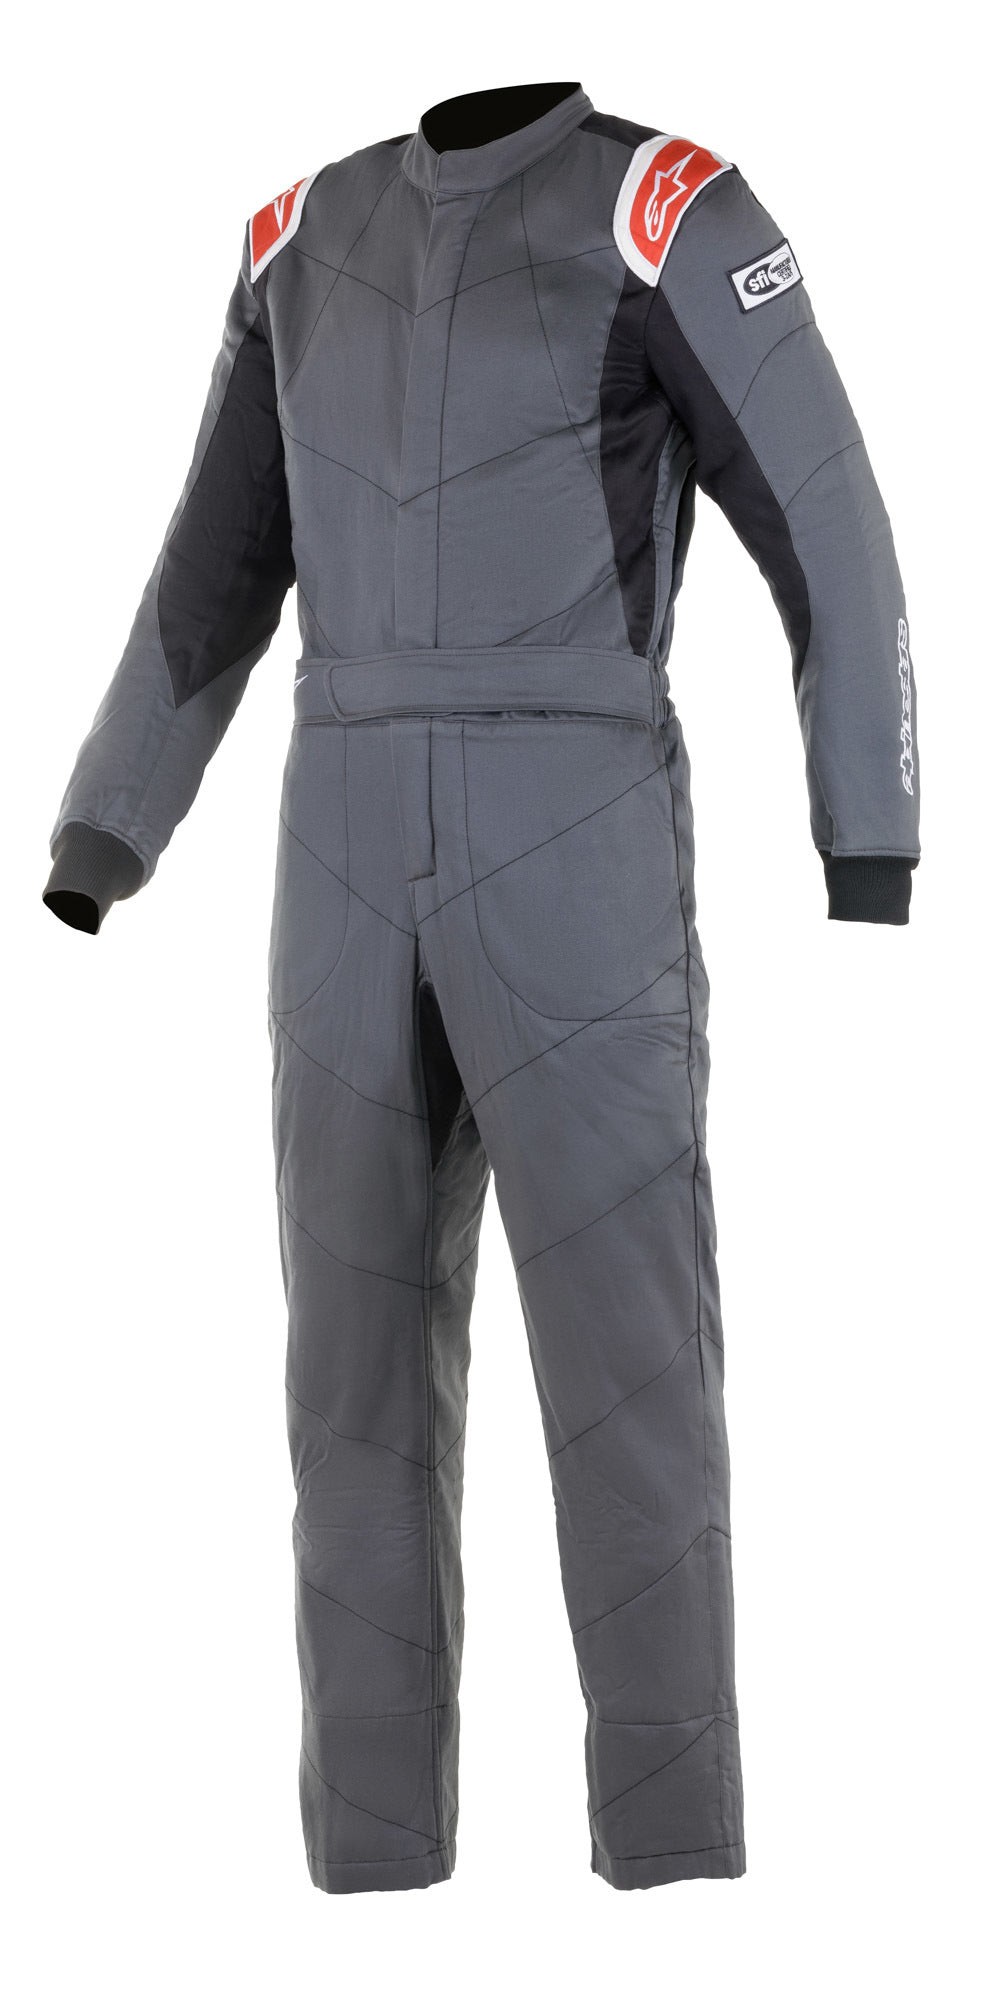 Alpinestars Suit Knoxville V2 Grey / Red 2X-Small ALP3355921-143-44